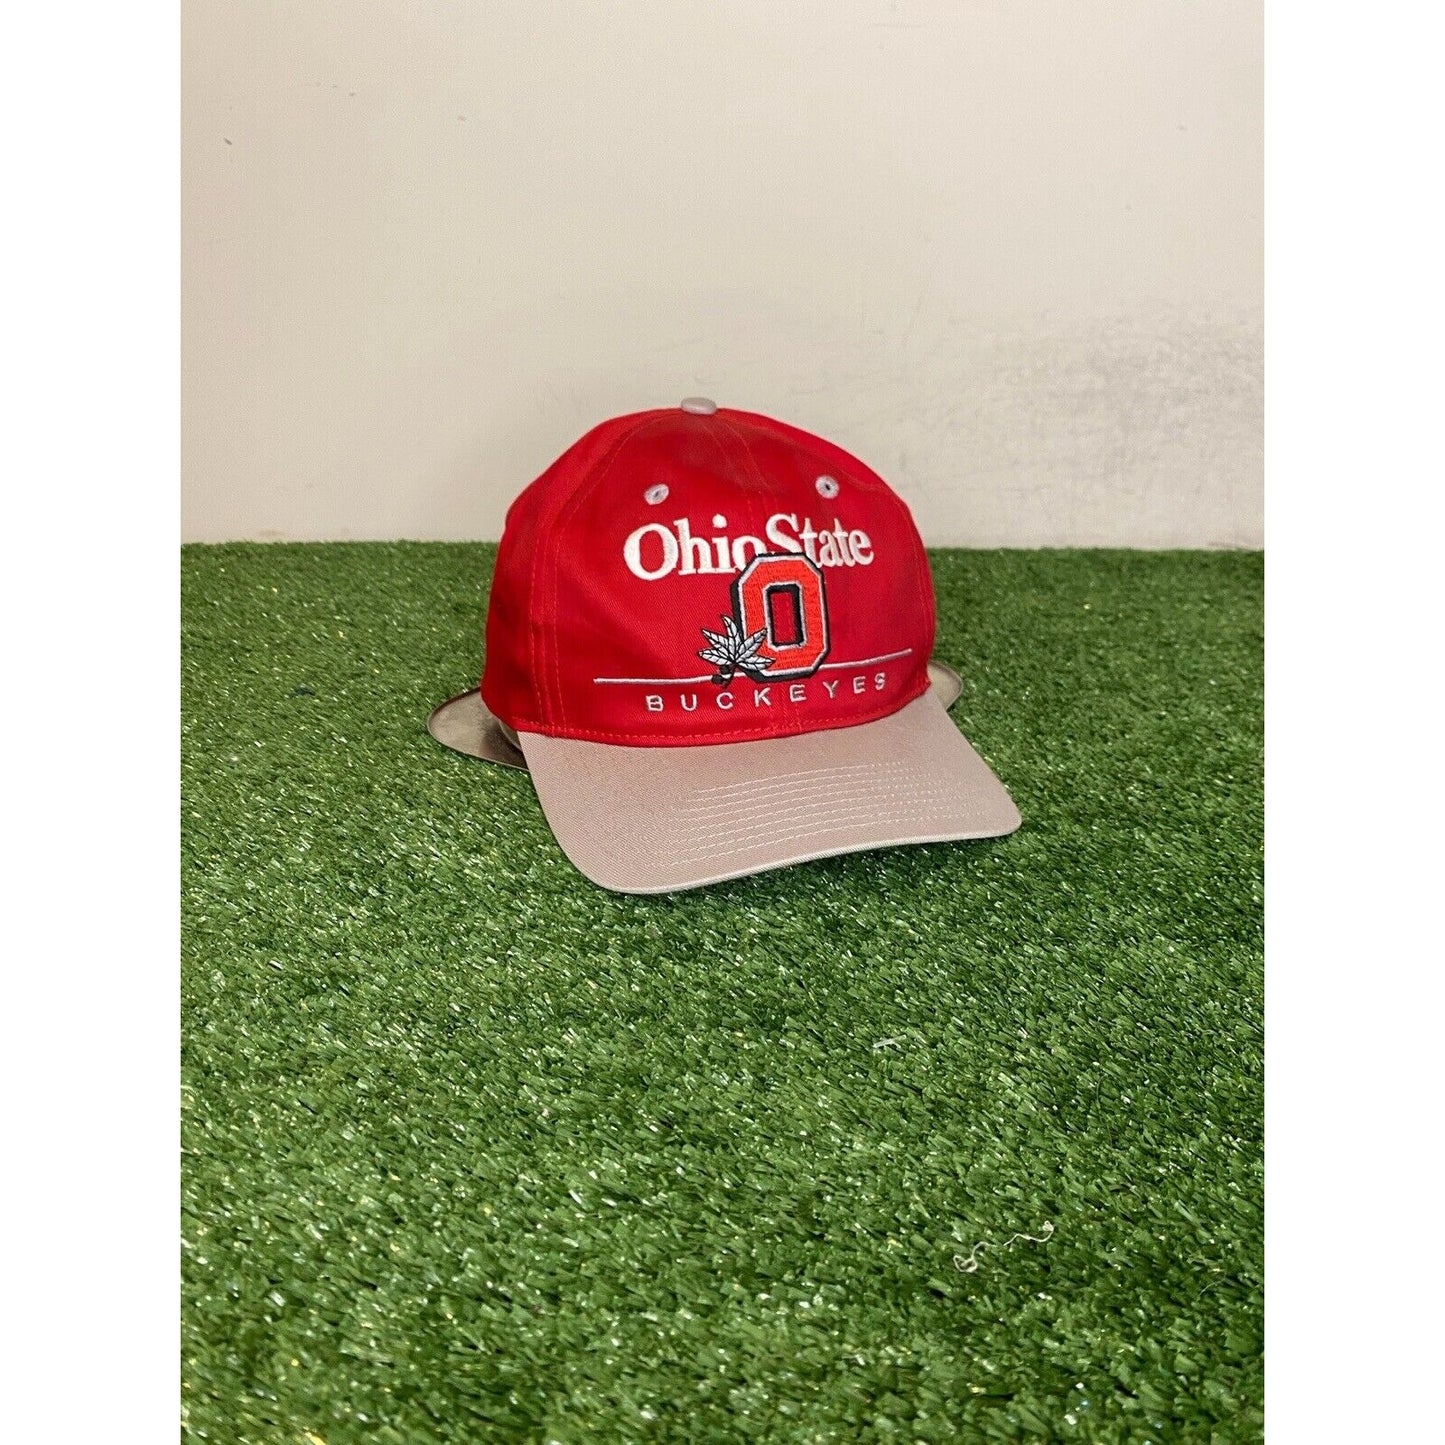 Vintage Ohio State Buckeyes hat cap snap back mens red gray Twins Enterprise 90s